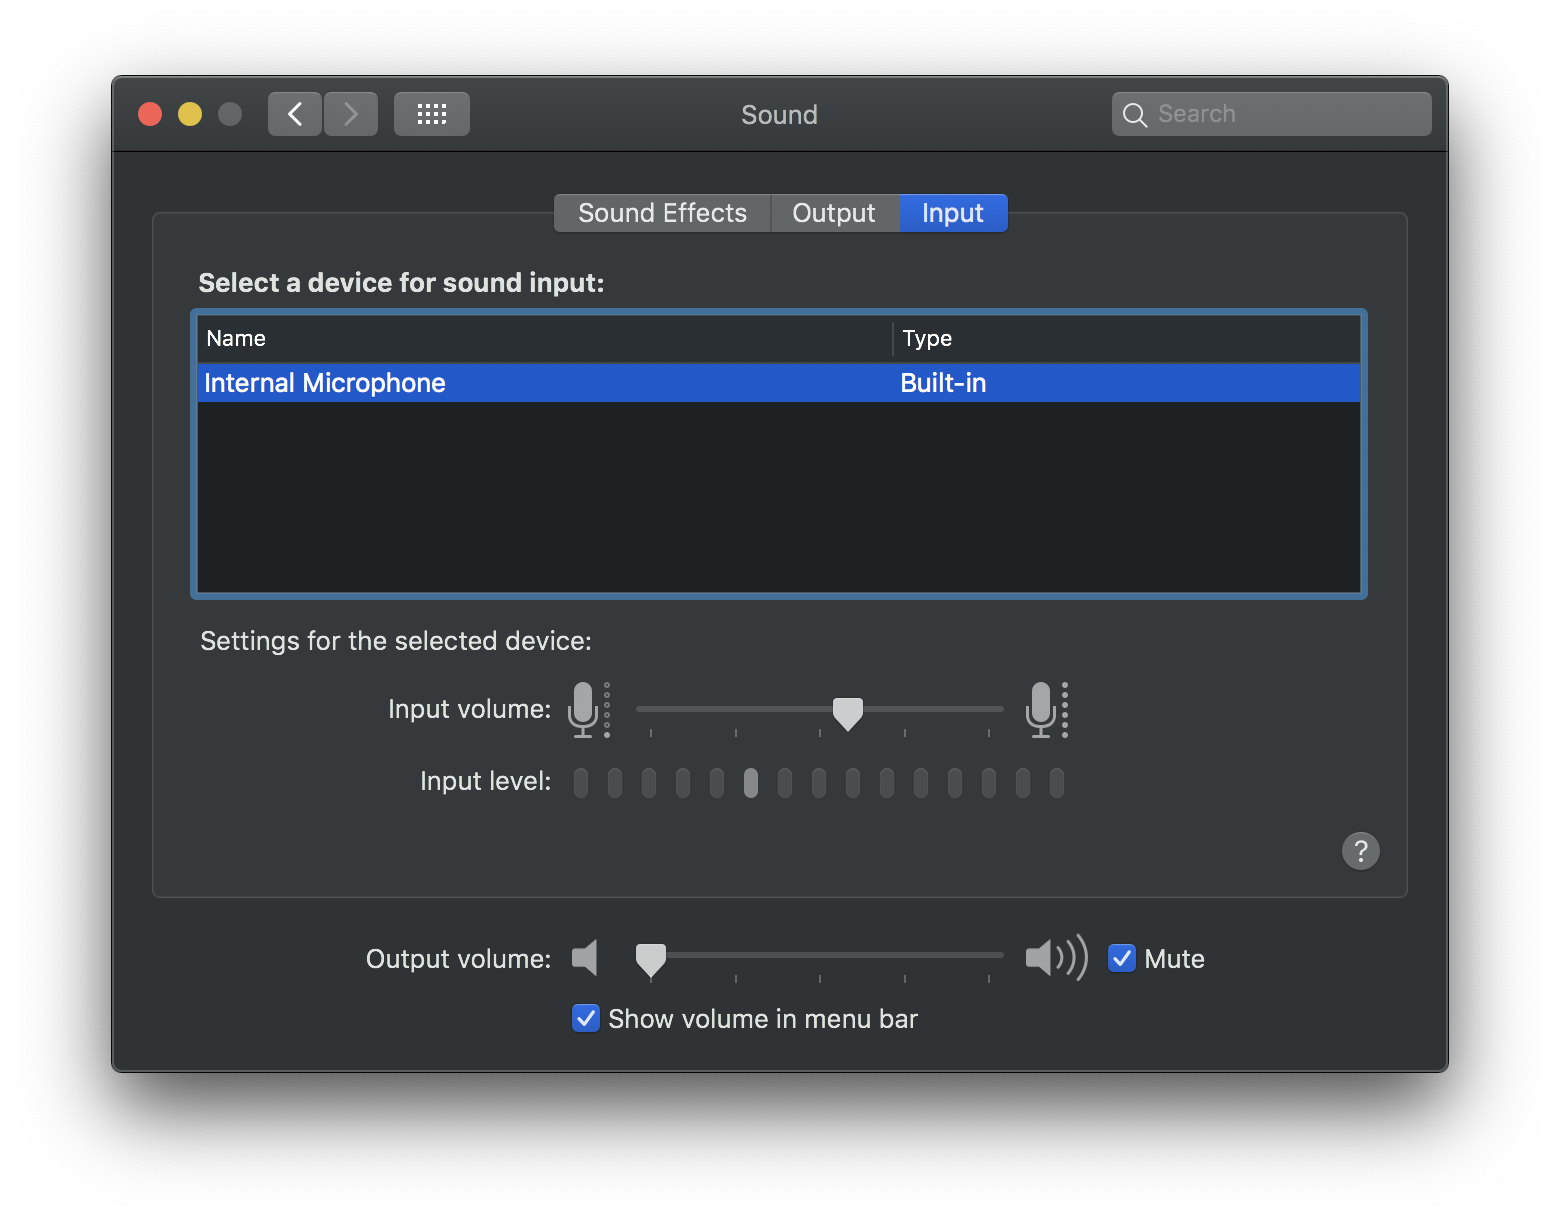 Disable any background noise reduction or echo cancellation settings in the System Preferences > Sound settings.
Update your audio drivers or software if you're still experiencing issues.